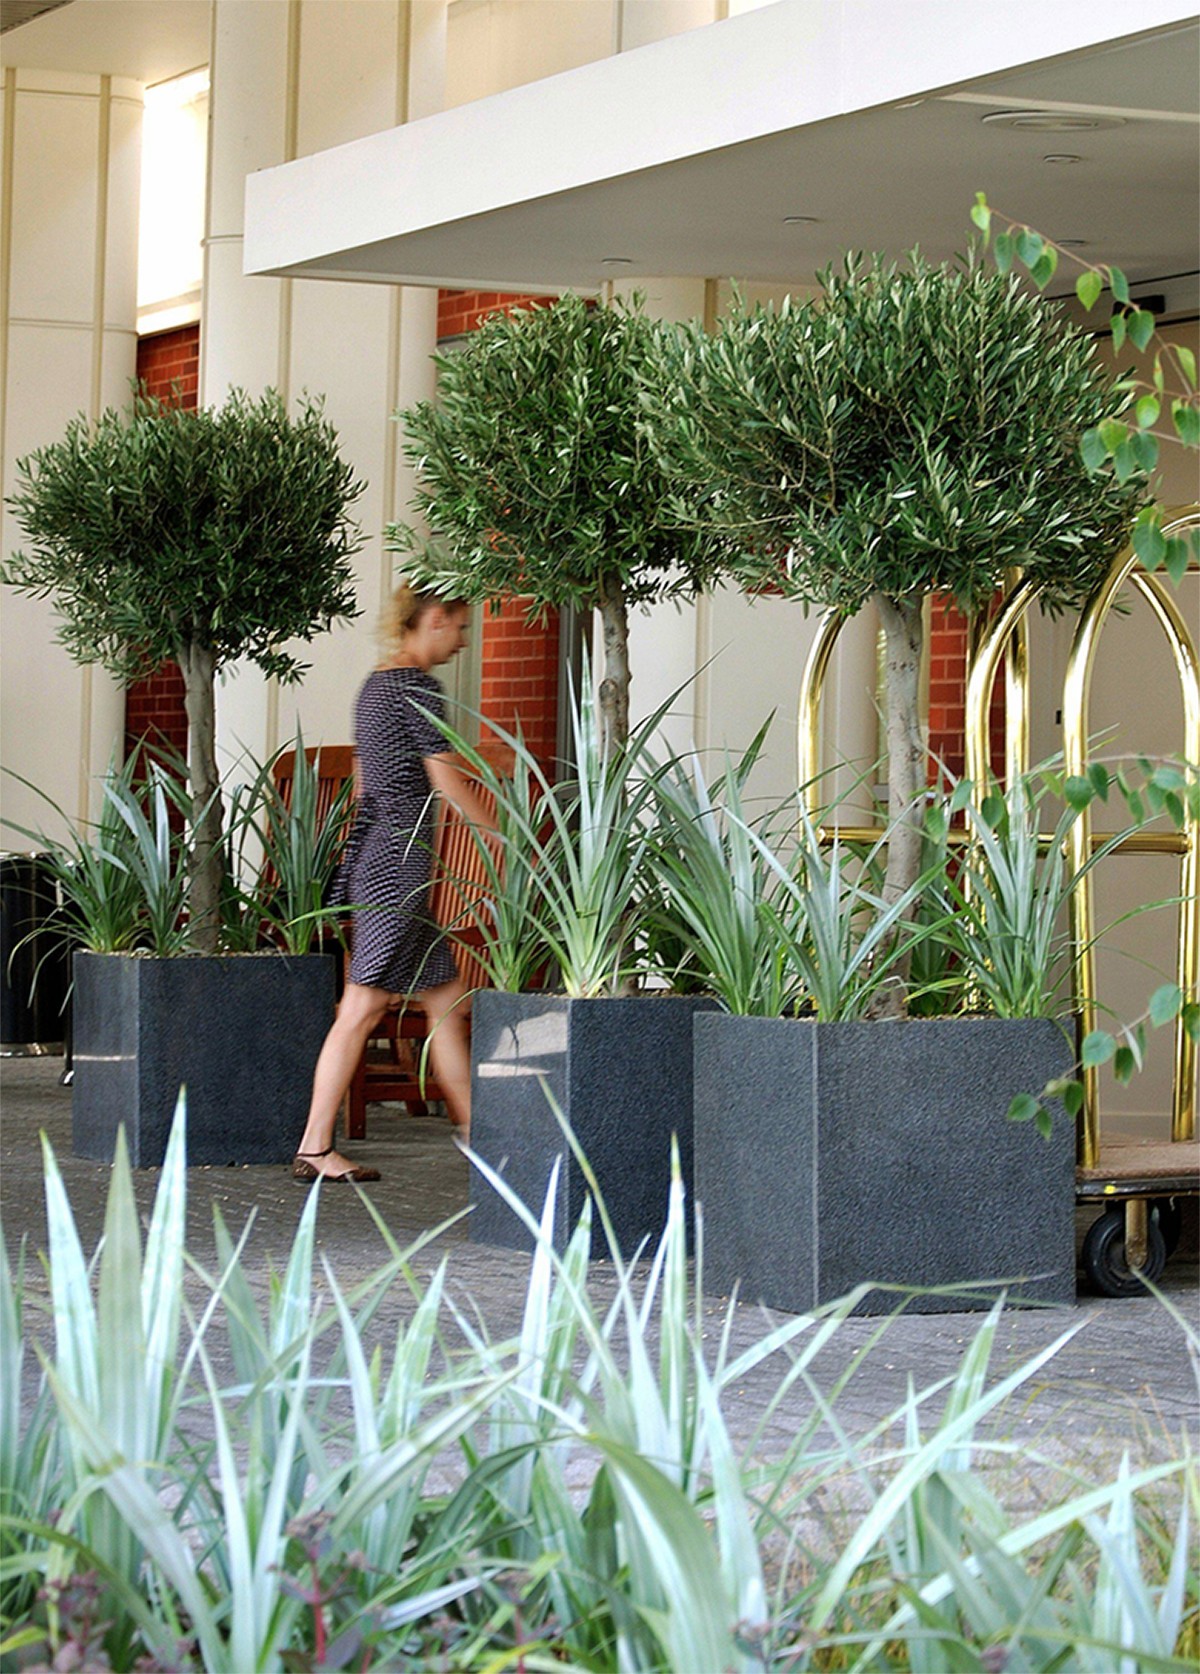 New fully recyclable range of planters launched